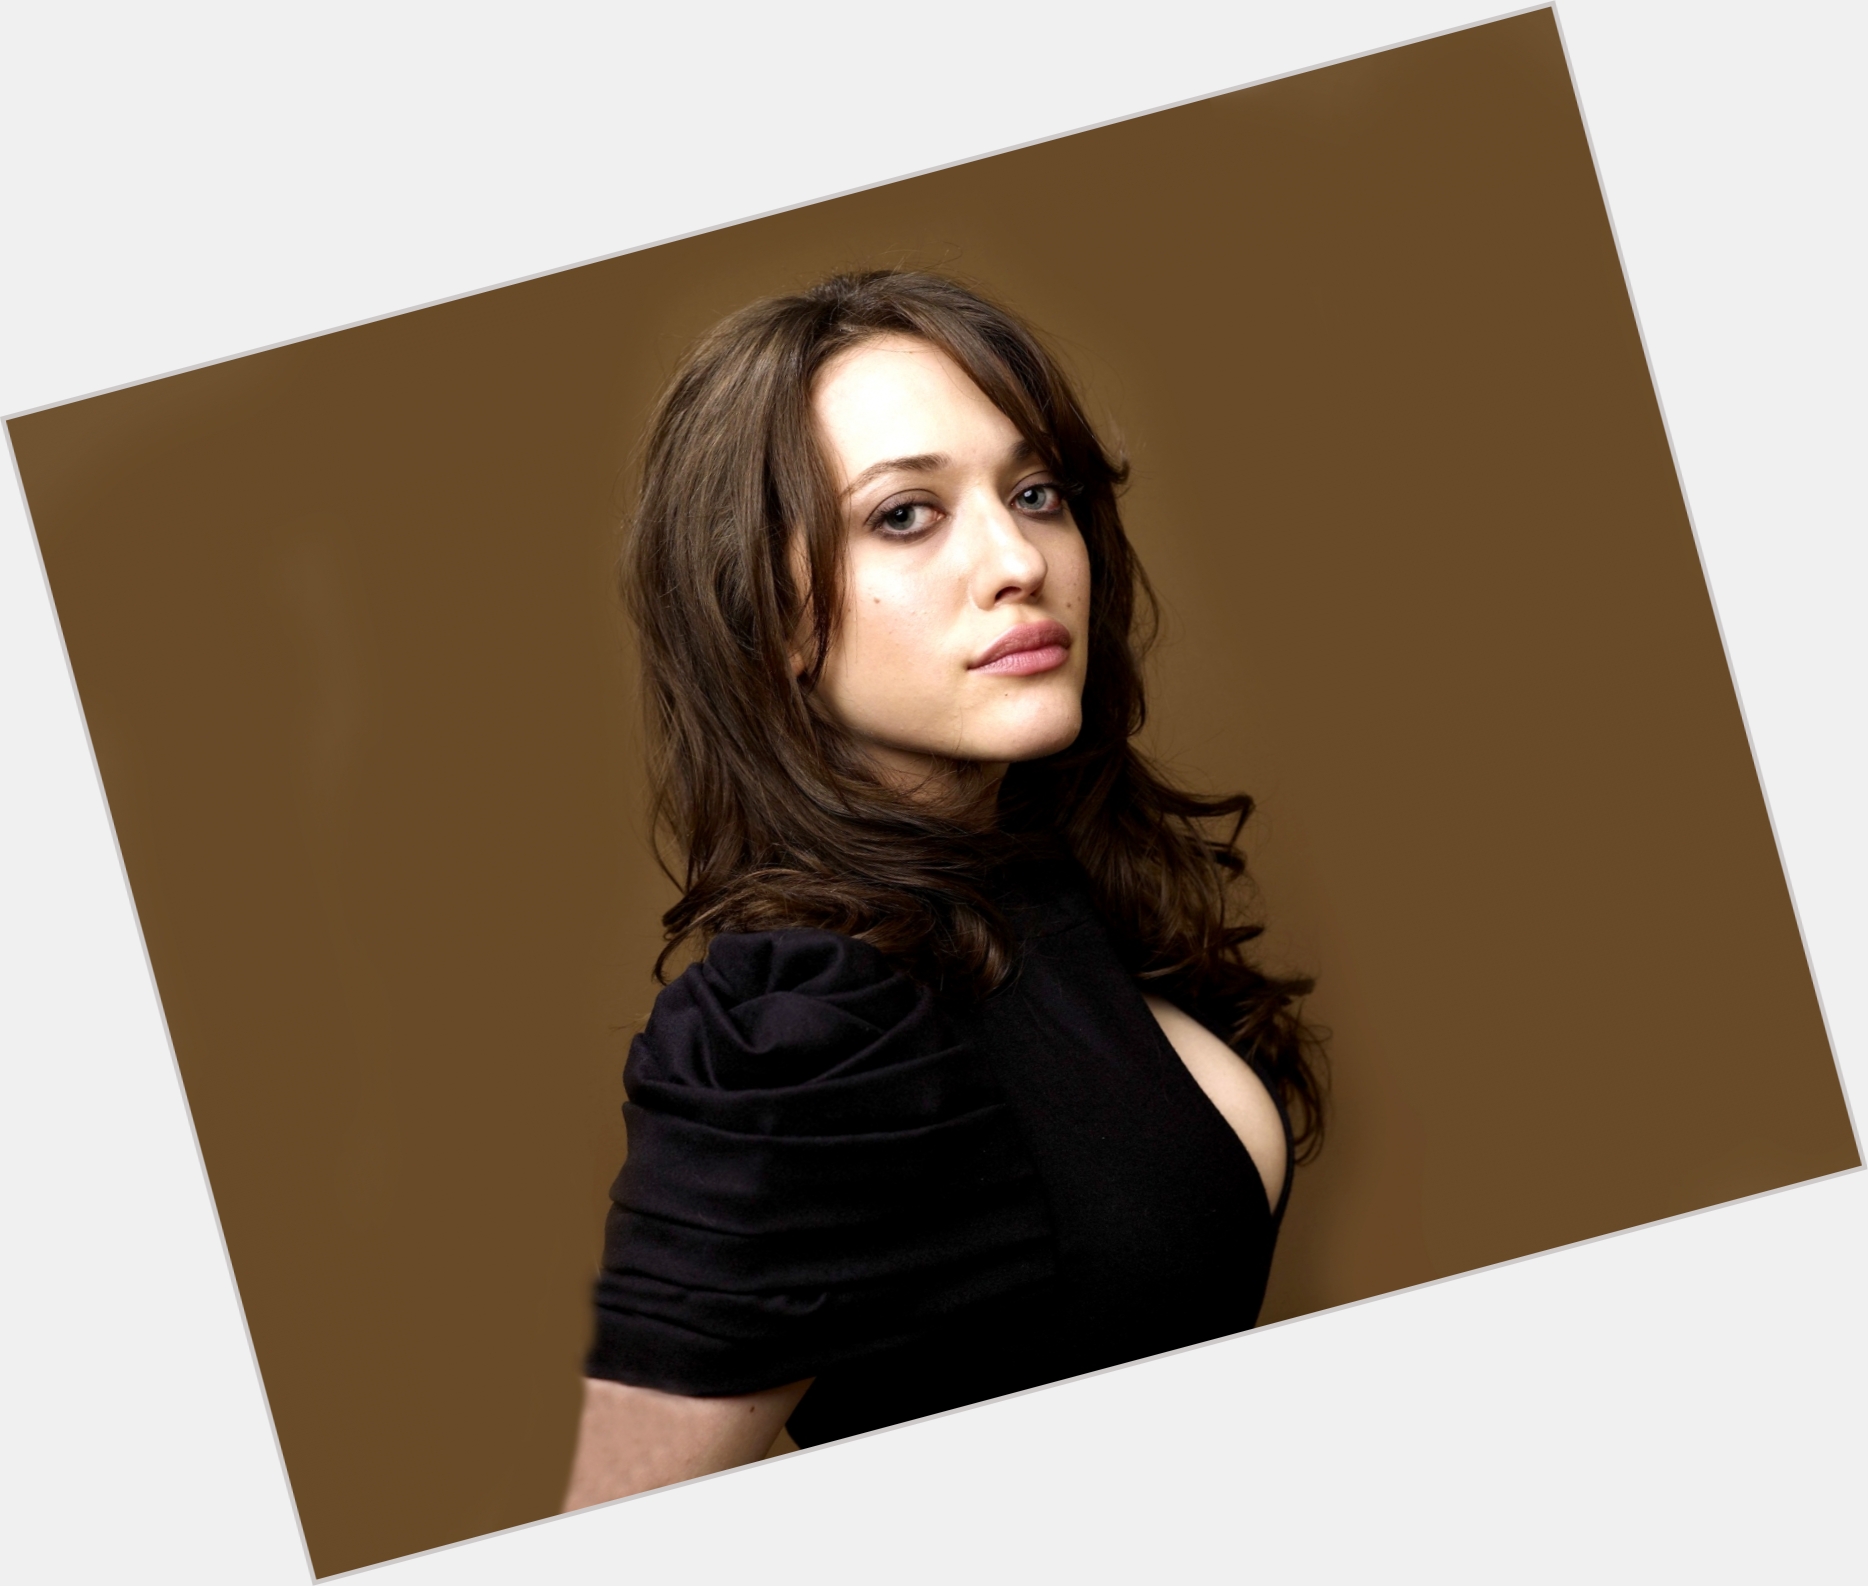 kat dennings weight before and after 2